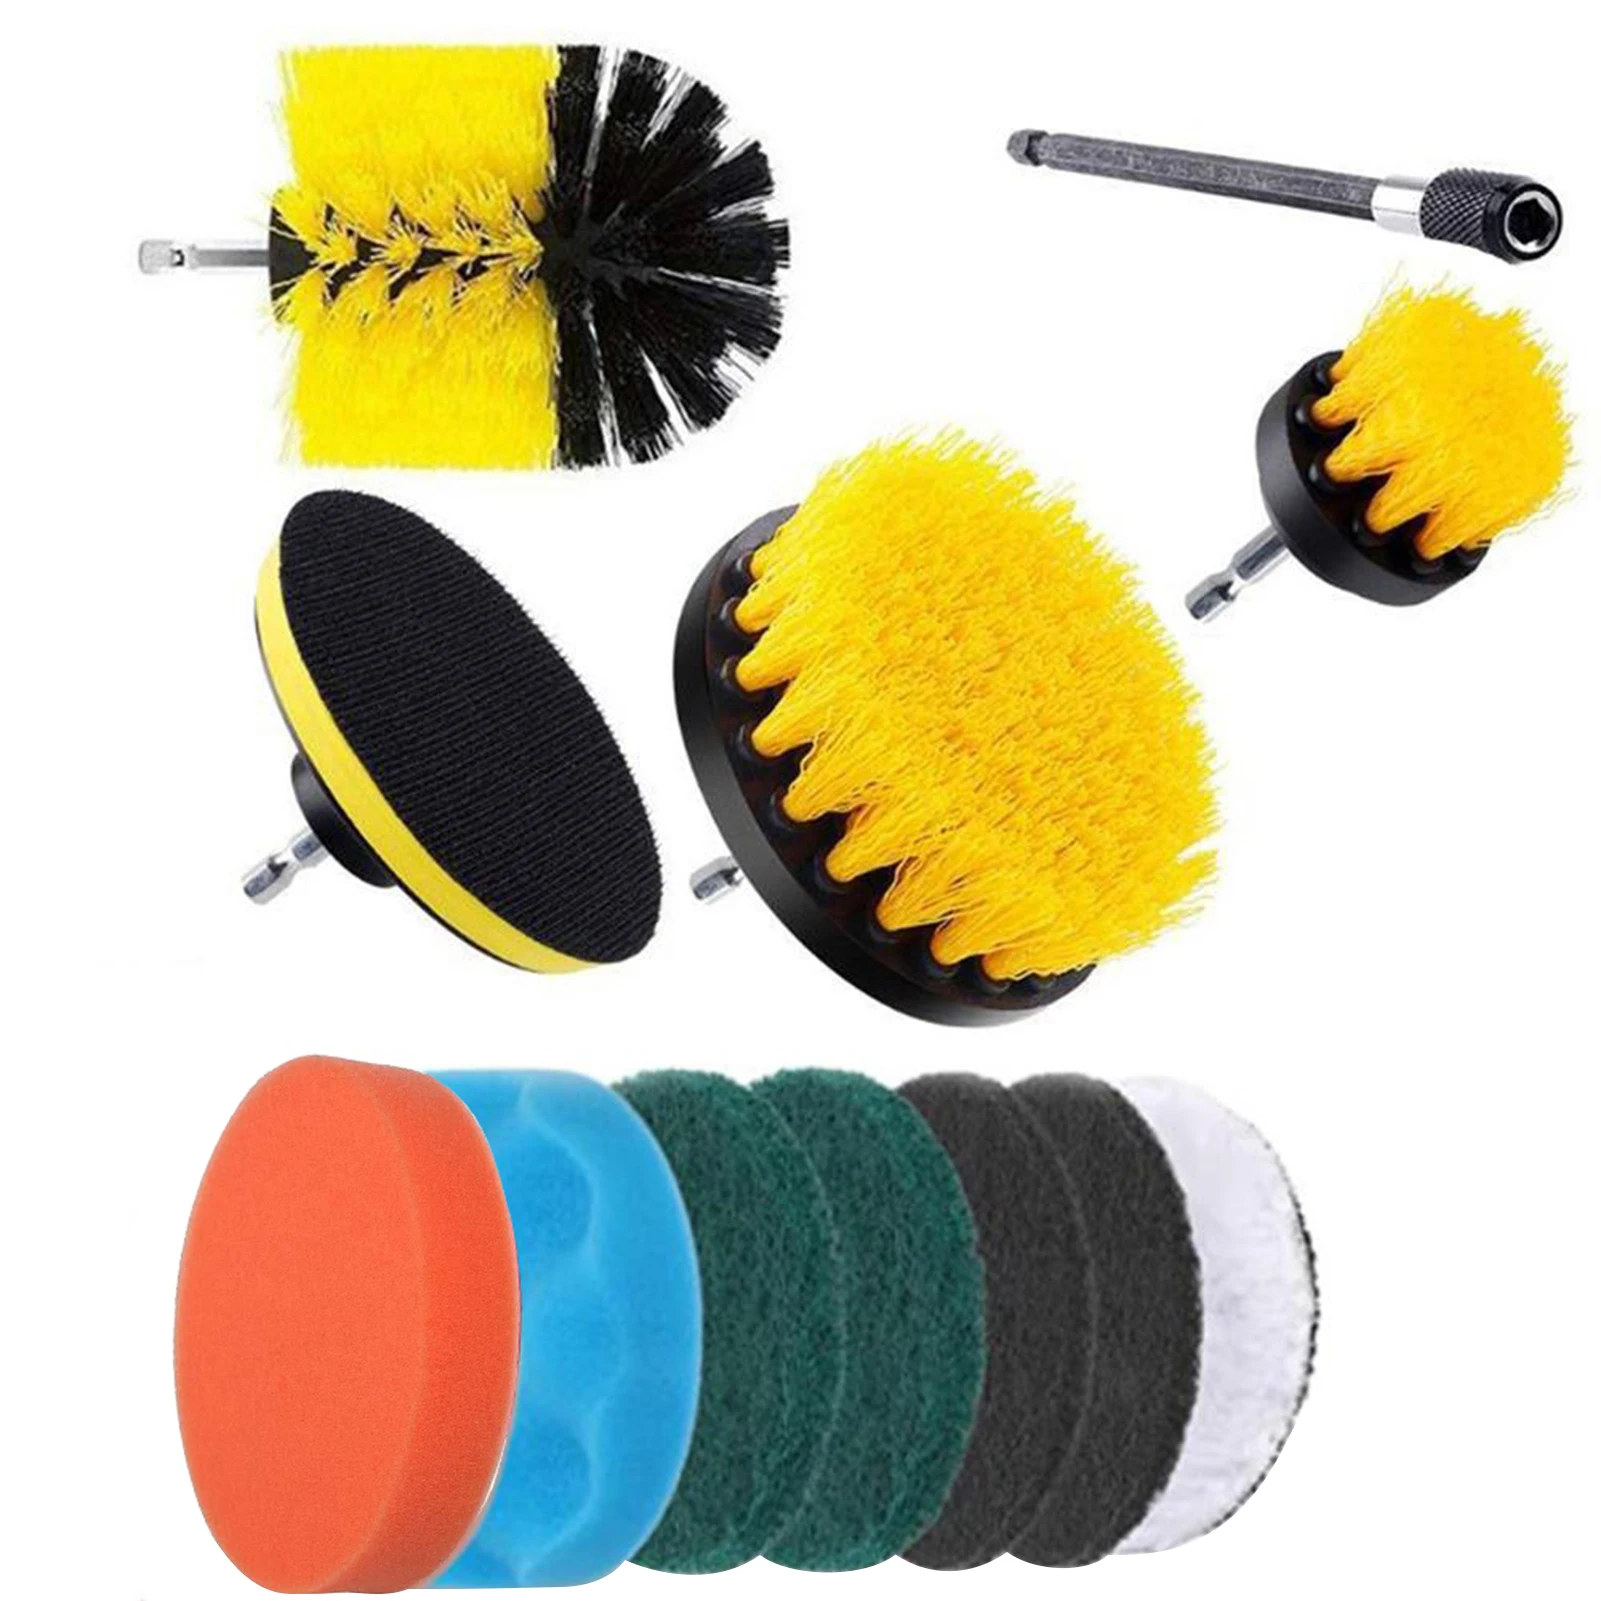 

12PCS/SET Electric Drill Brush Scrub Pads Kit Power Scrubber Cleaning Kit Cleaning Brush Scouring Pad for Carpet Glass Car Clean